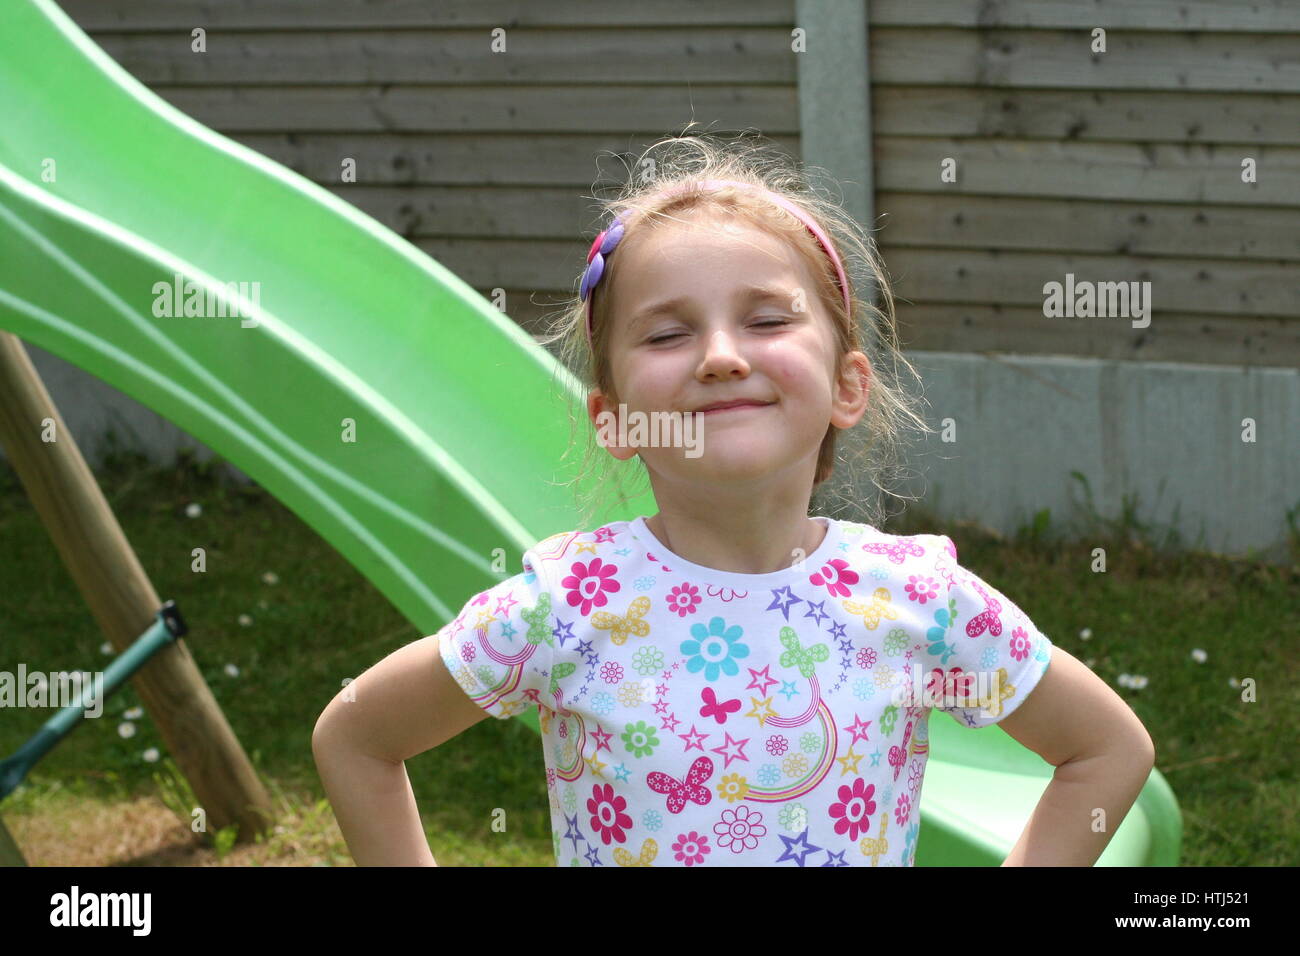 Little blonde girl child kid having fun, playing and messing, making a funny face, funny gesture, childhood joy, funny concept, joke, hand on hips Stock Photo